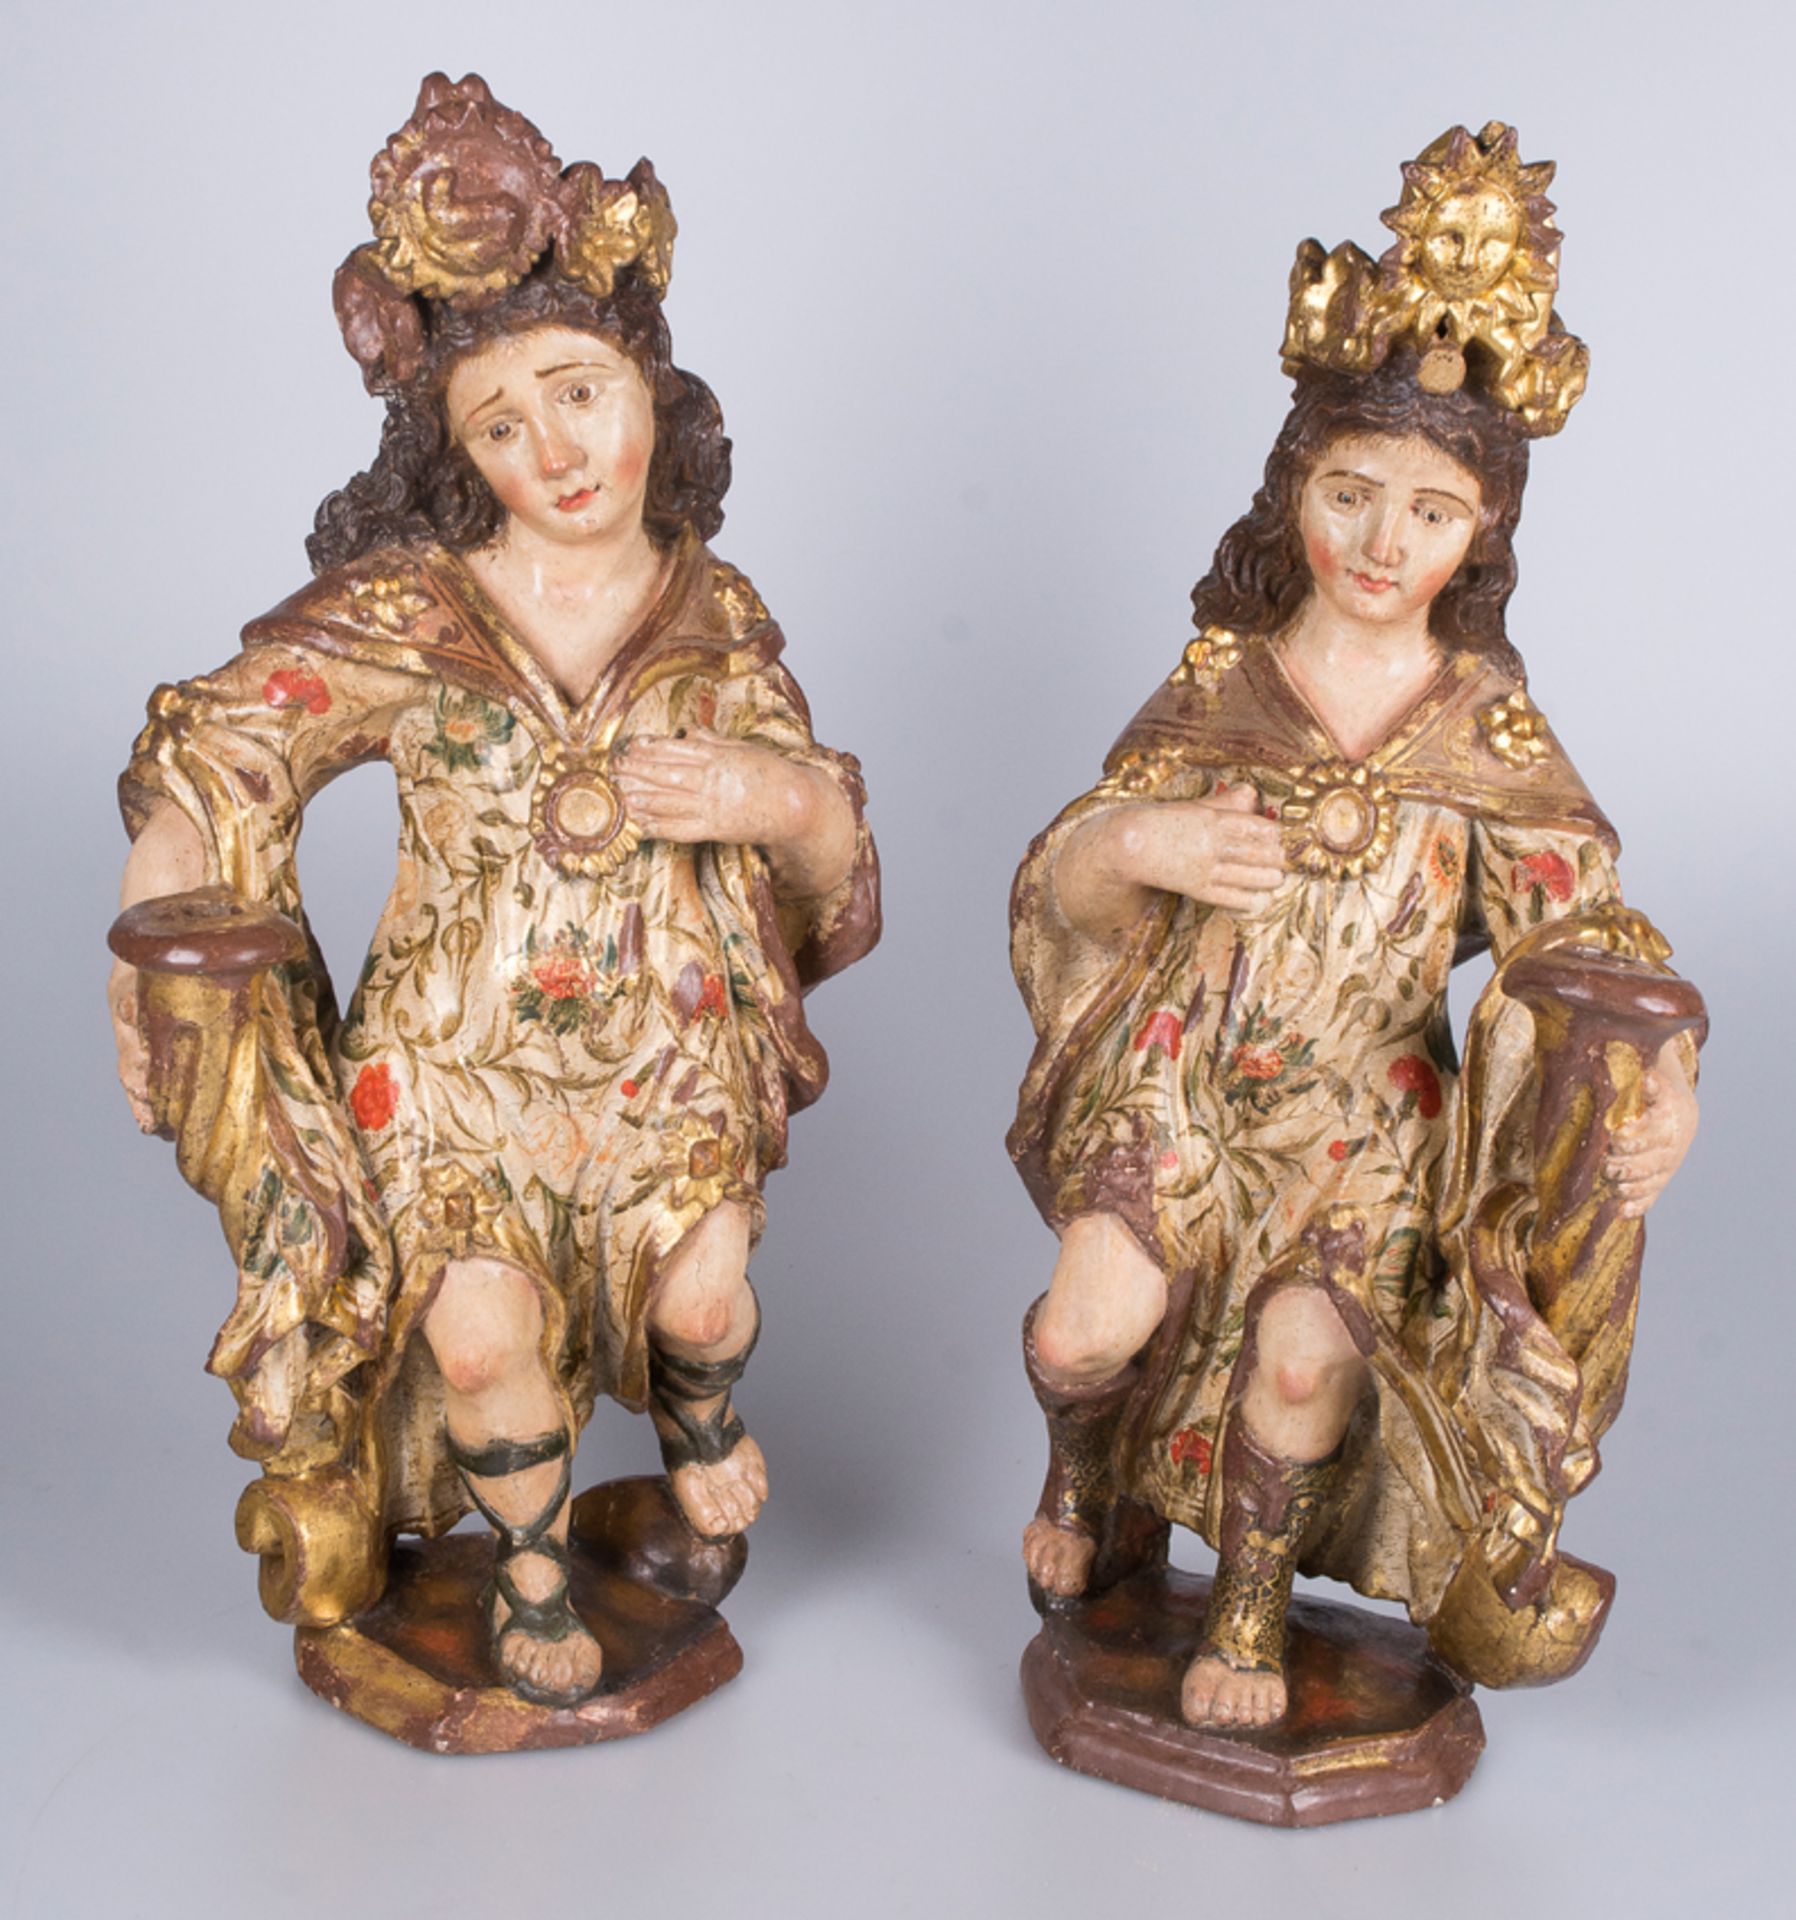 Imposing pair of angels in carved, gilded and polychromed wood. Viceroyalty of Peru. 17th - 18th cen - Bild 4 aus 11